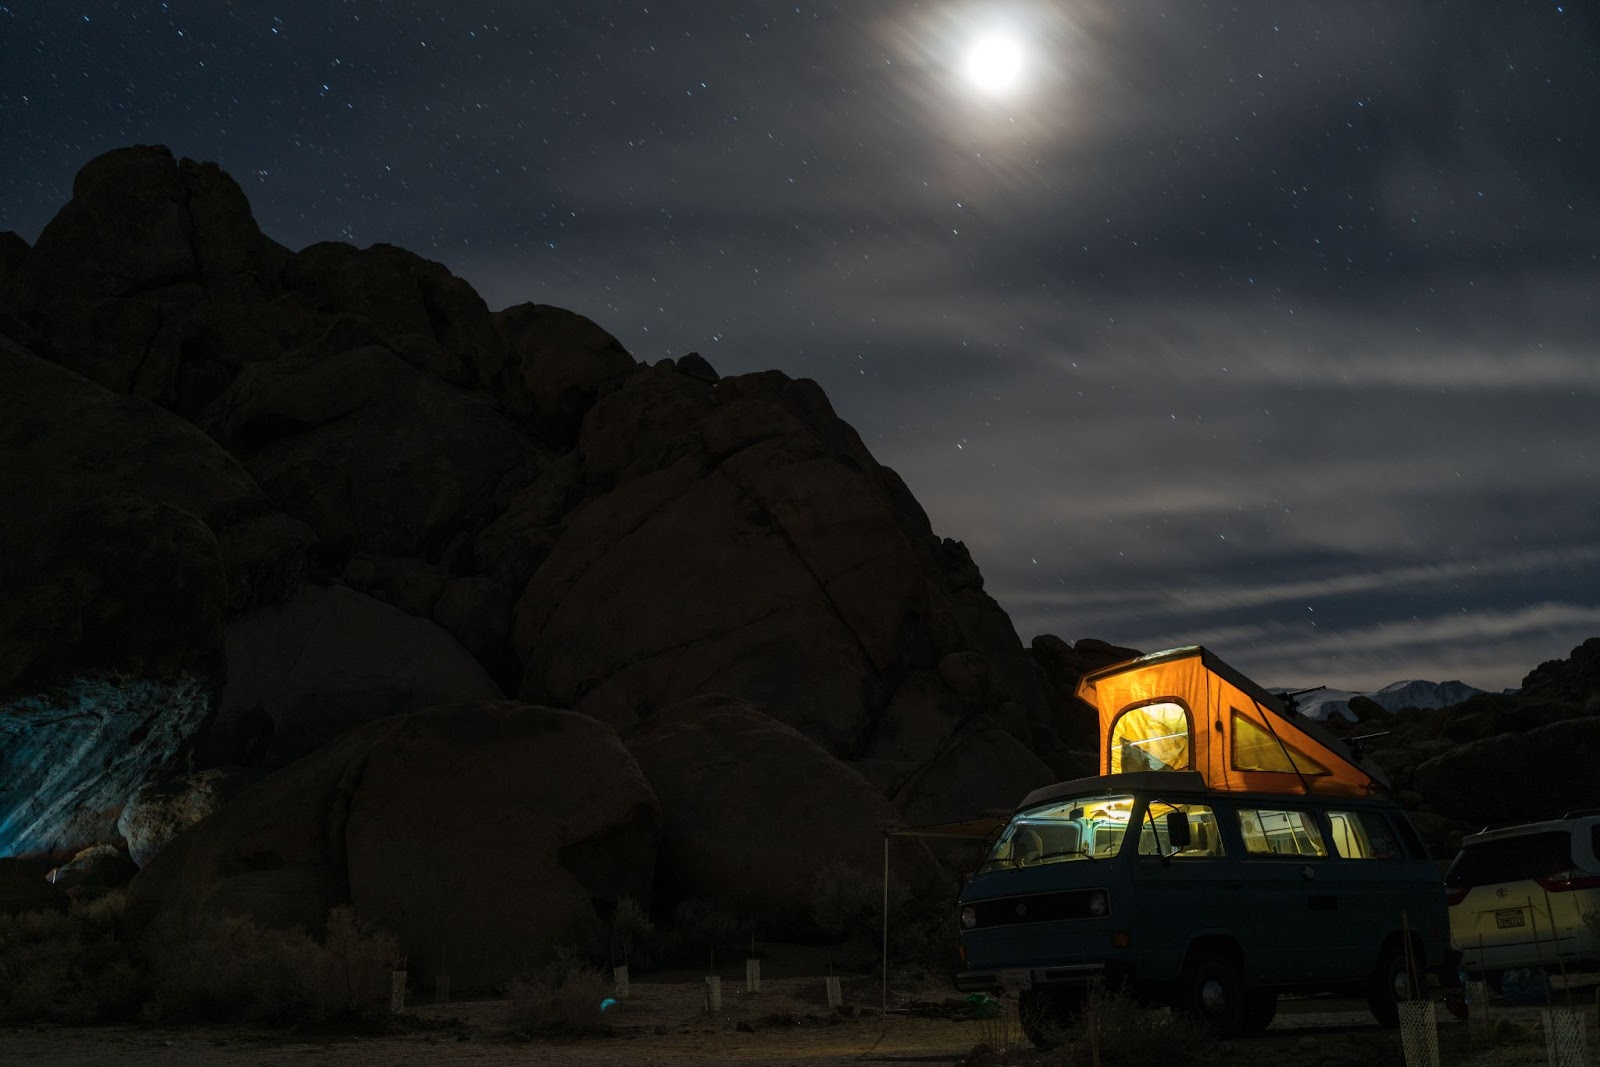 Campervan for rent with night sky